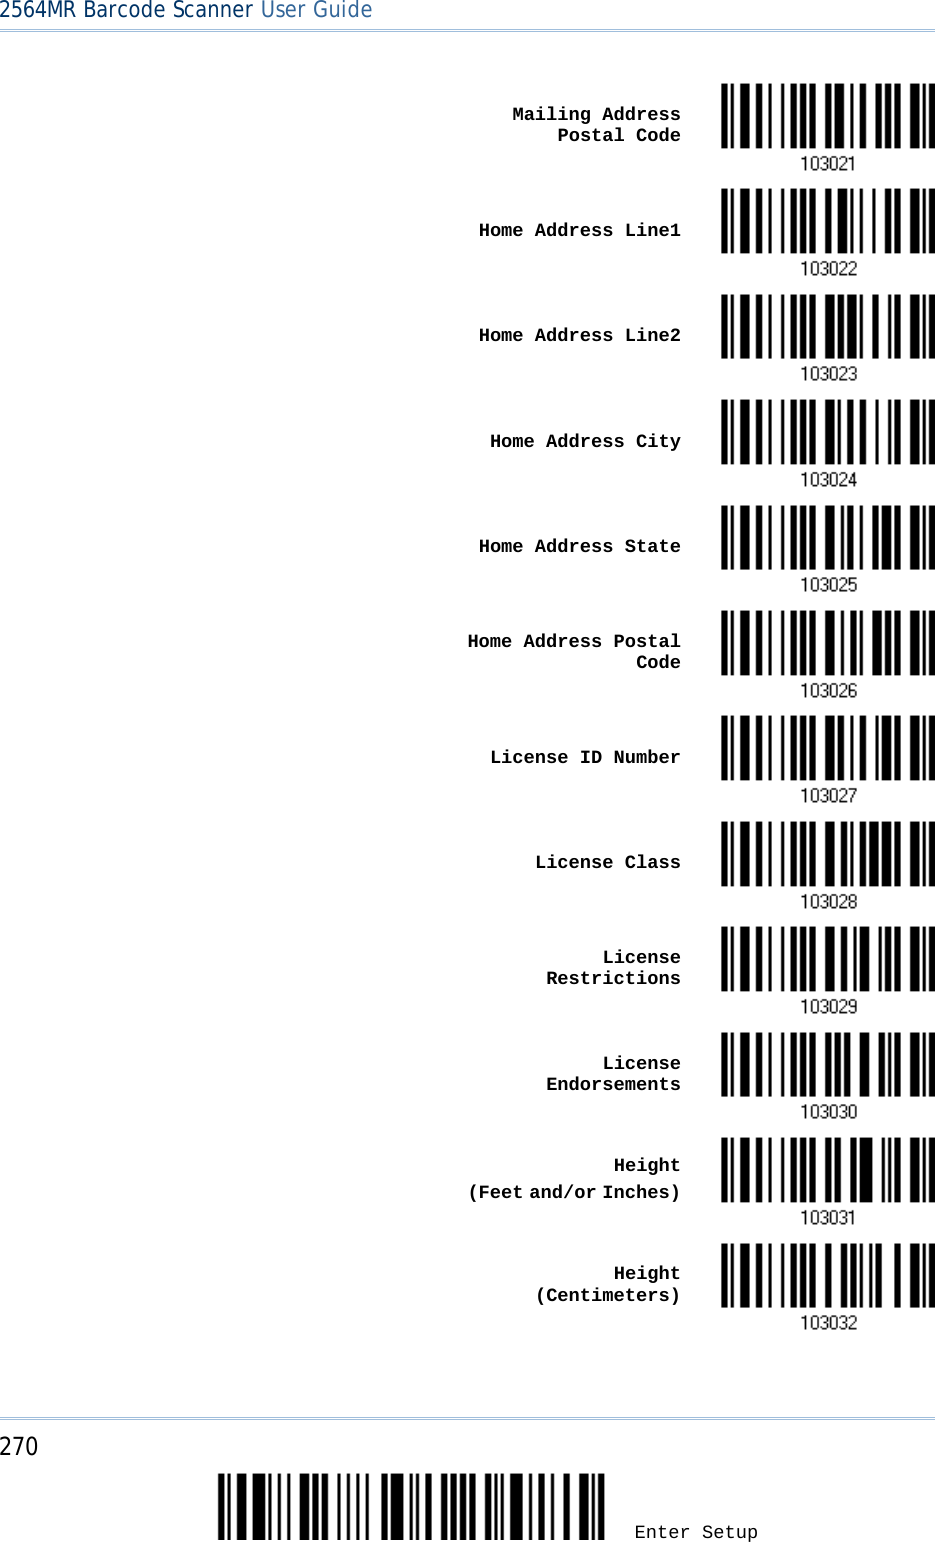 2564MR Barcode Scanner User Guide    Mailing Address Postal Code     Home Address Line1     Home Address Line2    Home Address City    Home Address State     Home Address Postal Code    License ID Number     License Class     License Restrictions    License Endorsements    Height  (Feet and/or Inches)    Height (Centimeters)  270 Enter Setup 